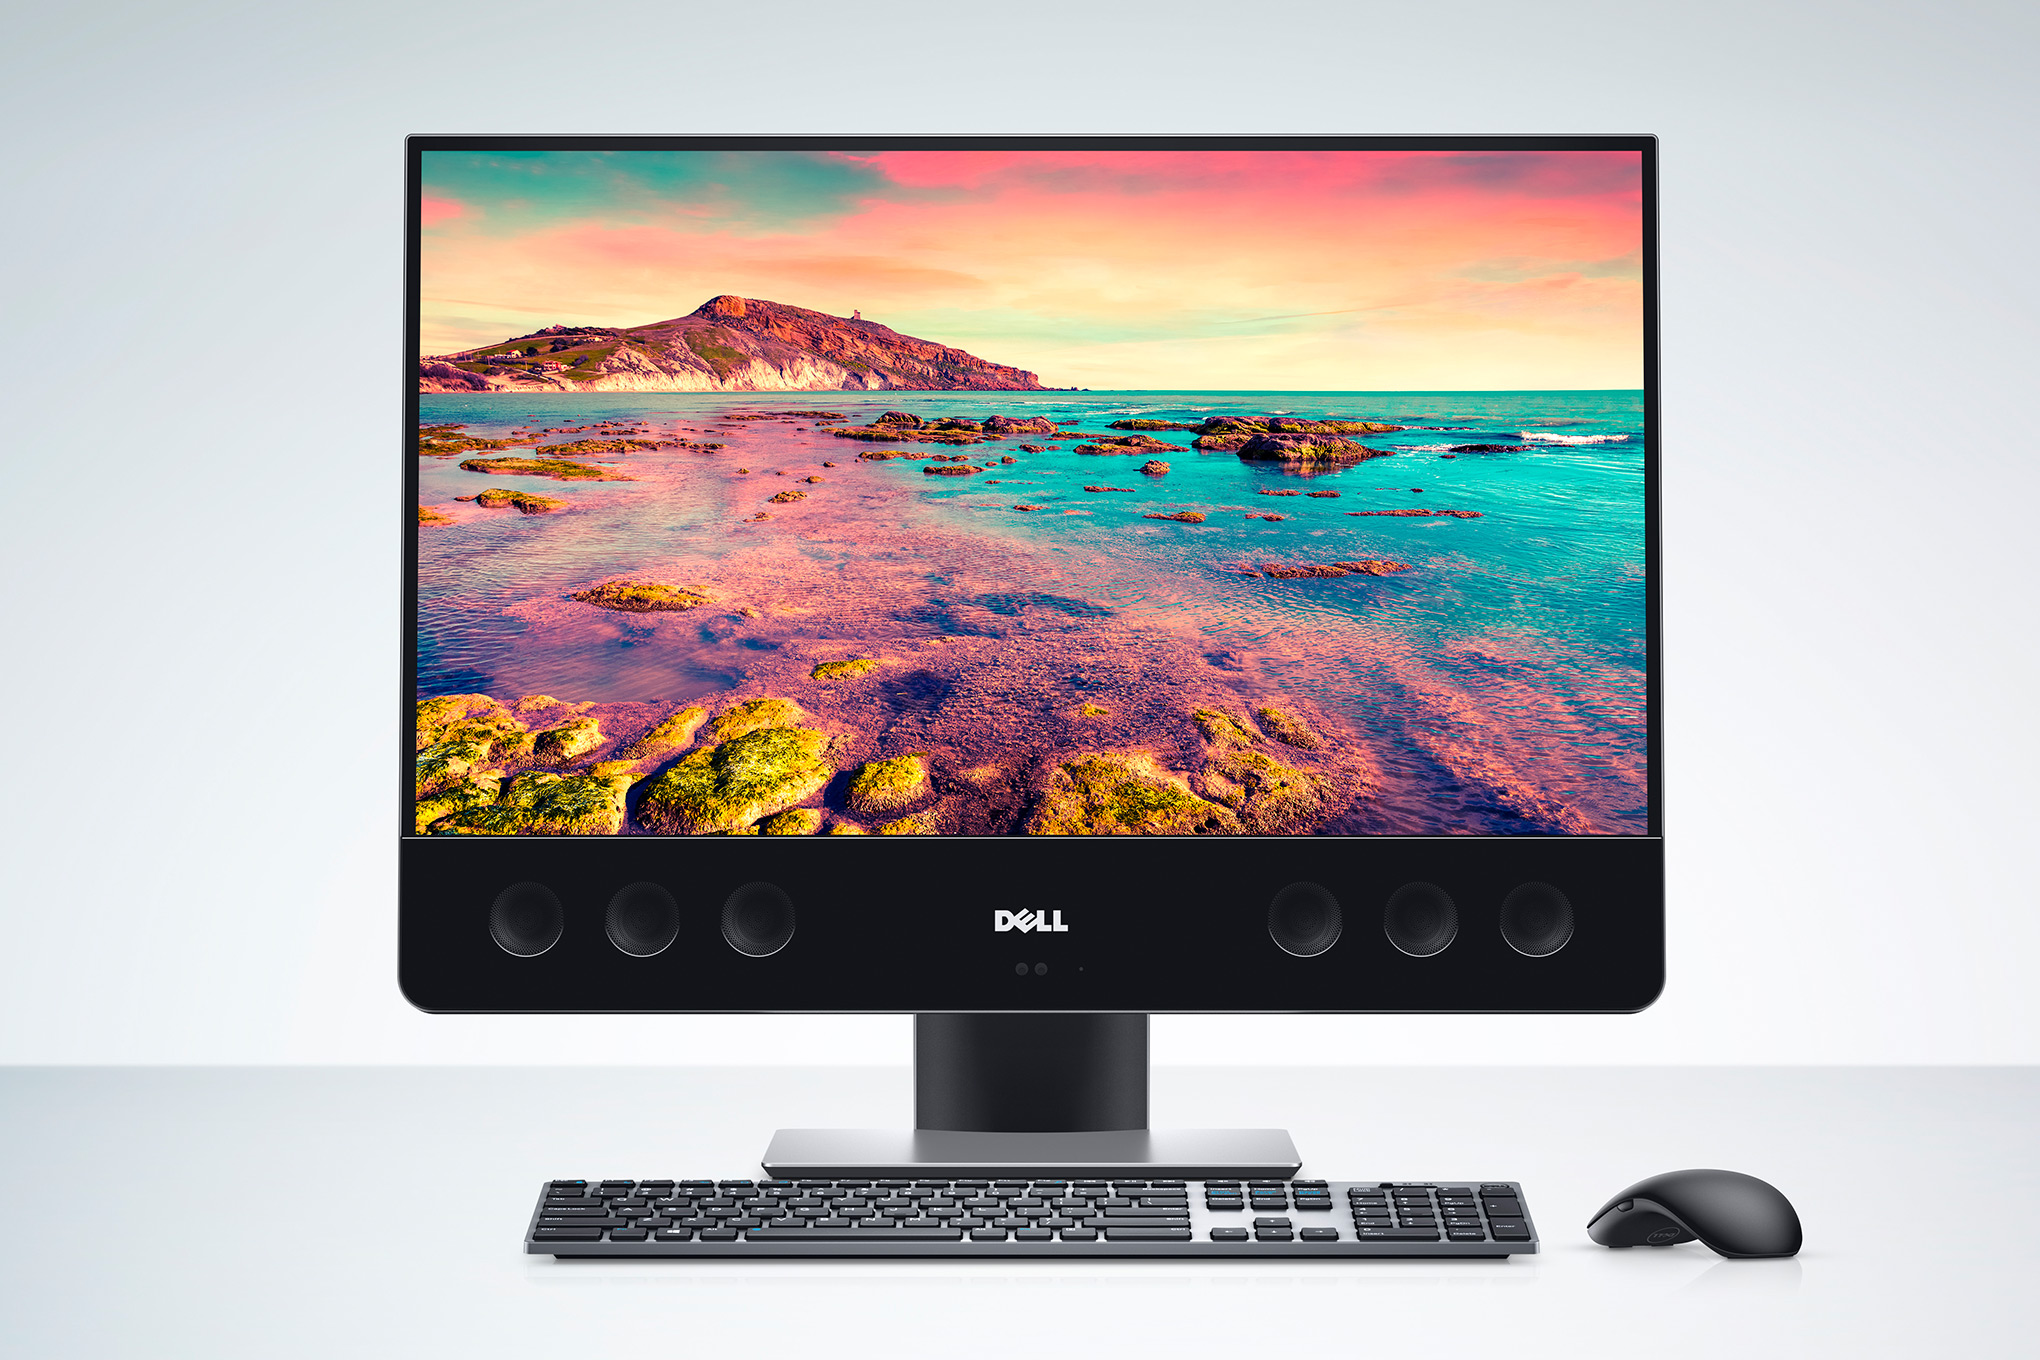 Dell -XPS 27 all-in-one PC